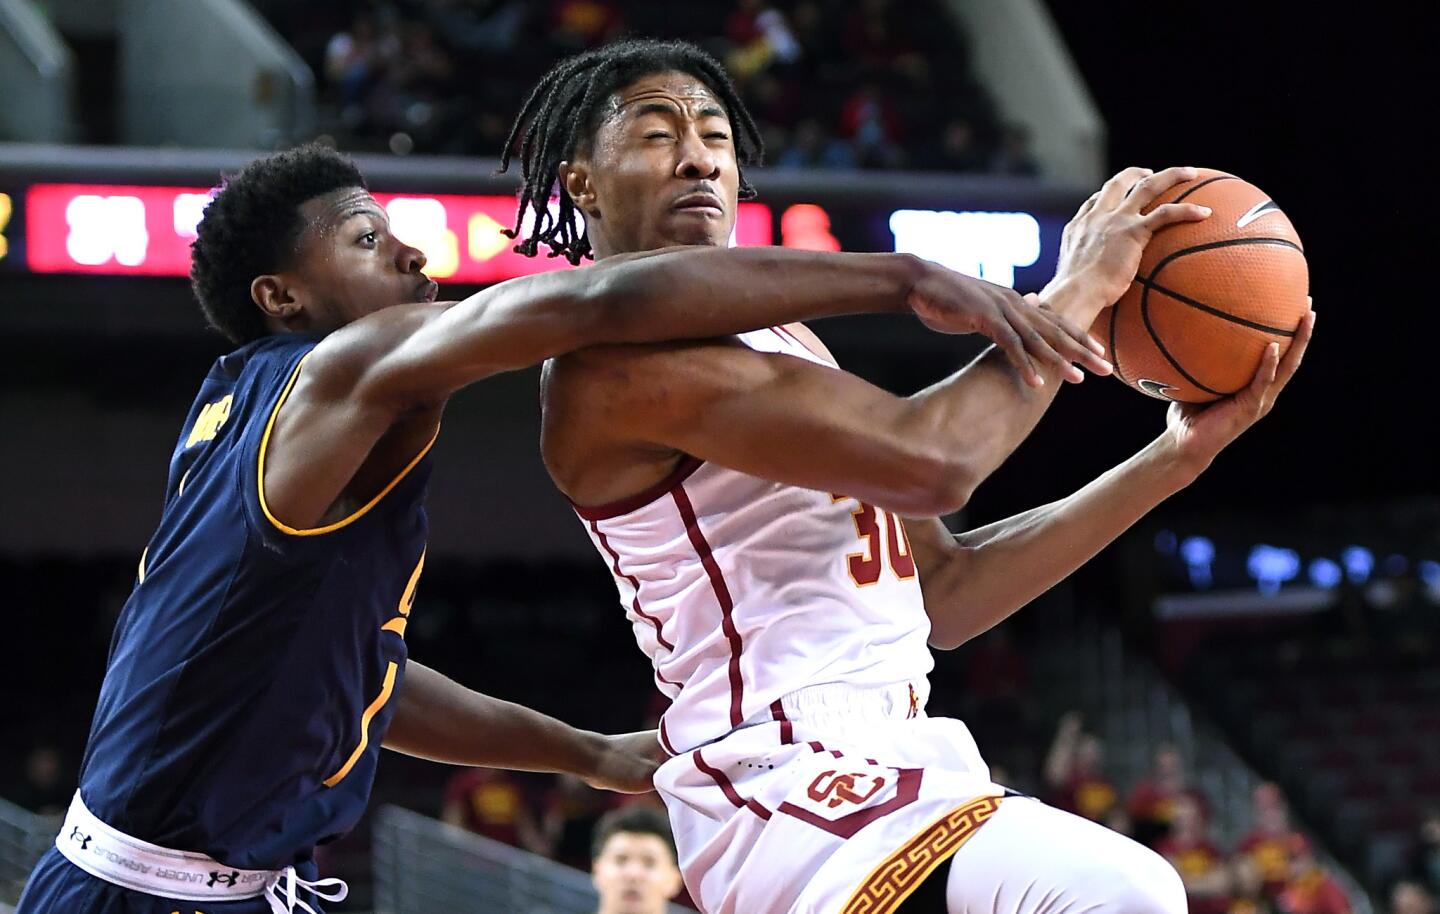 USC guard Elijah Stewart is fouled by Cal guard Darius McNeill while driving to the basket on Jan. 28.